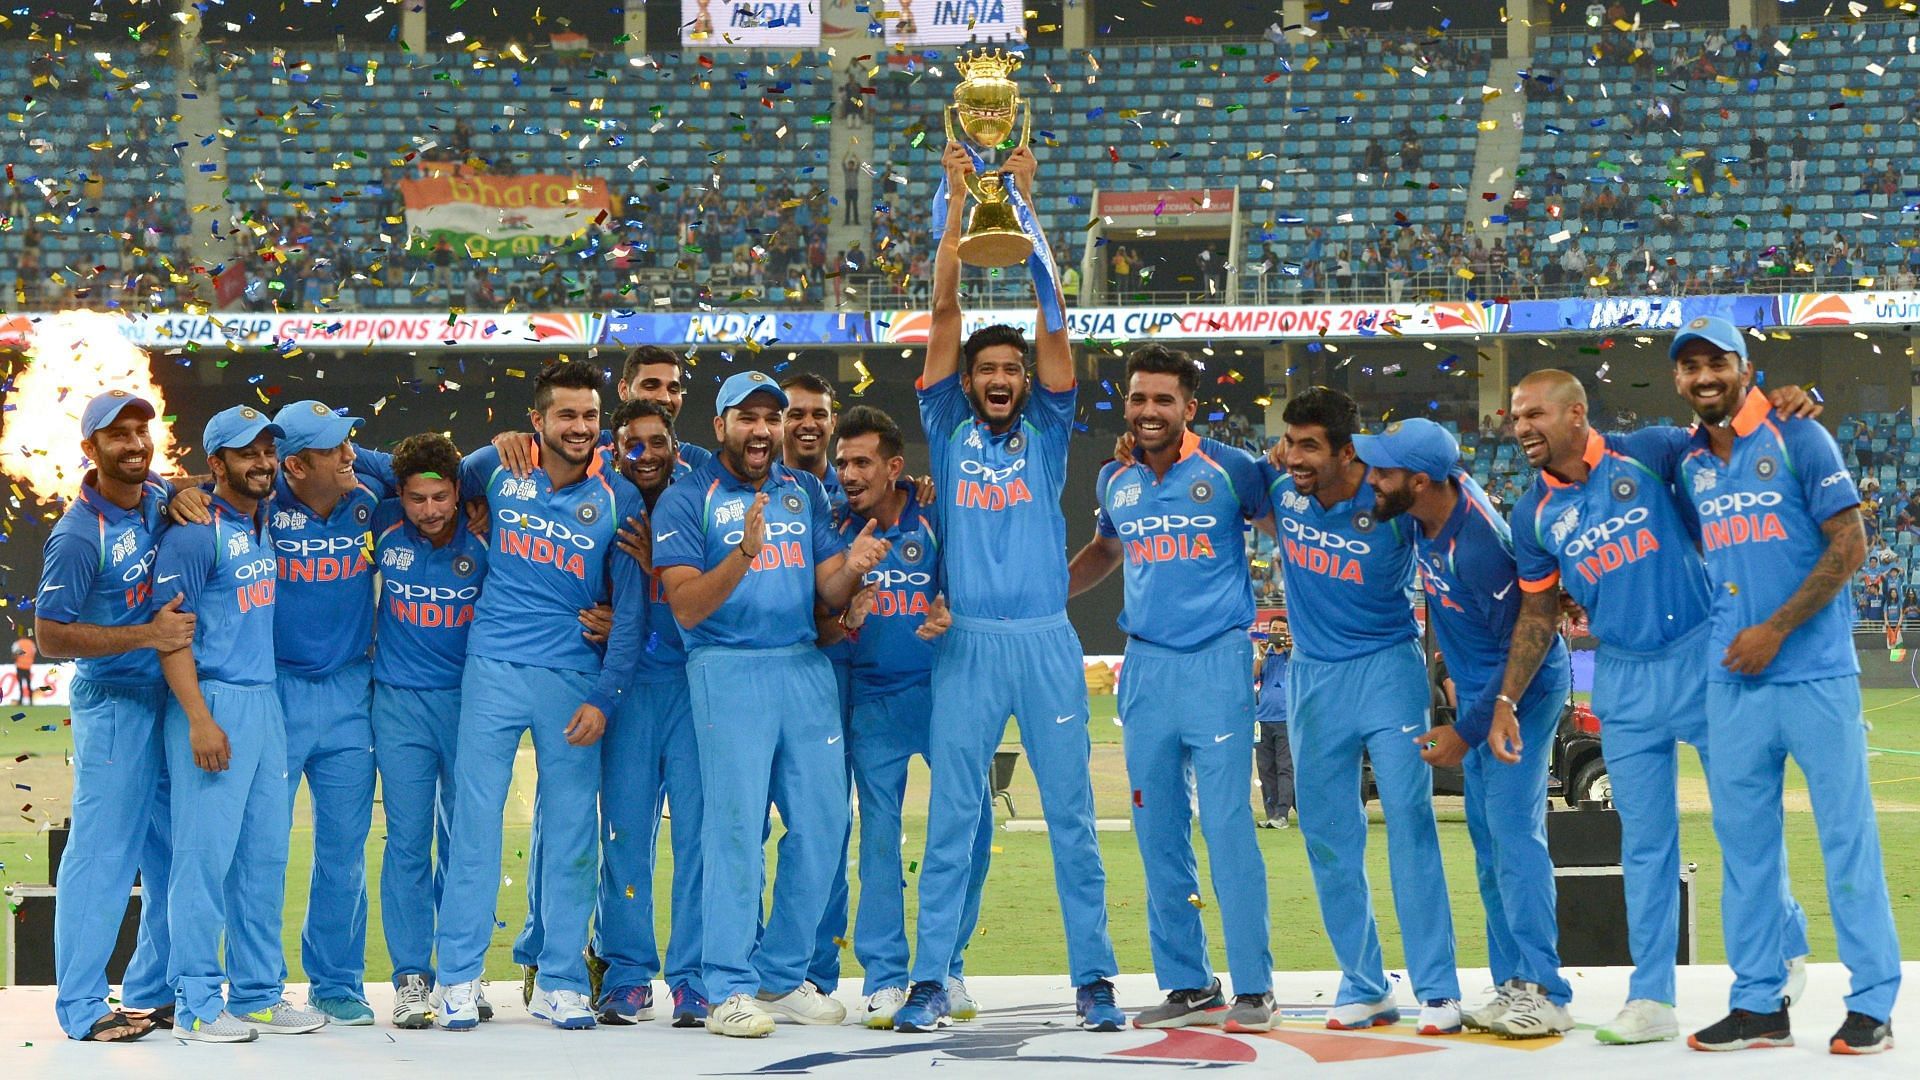 Rohit Sharma led India to their 7th title